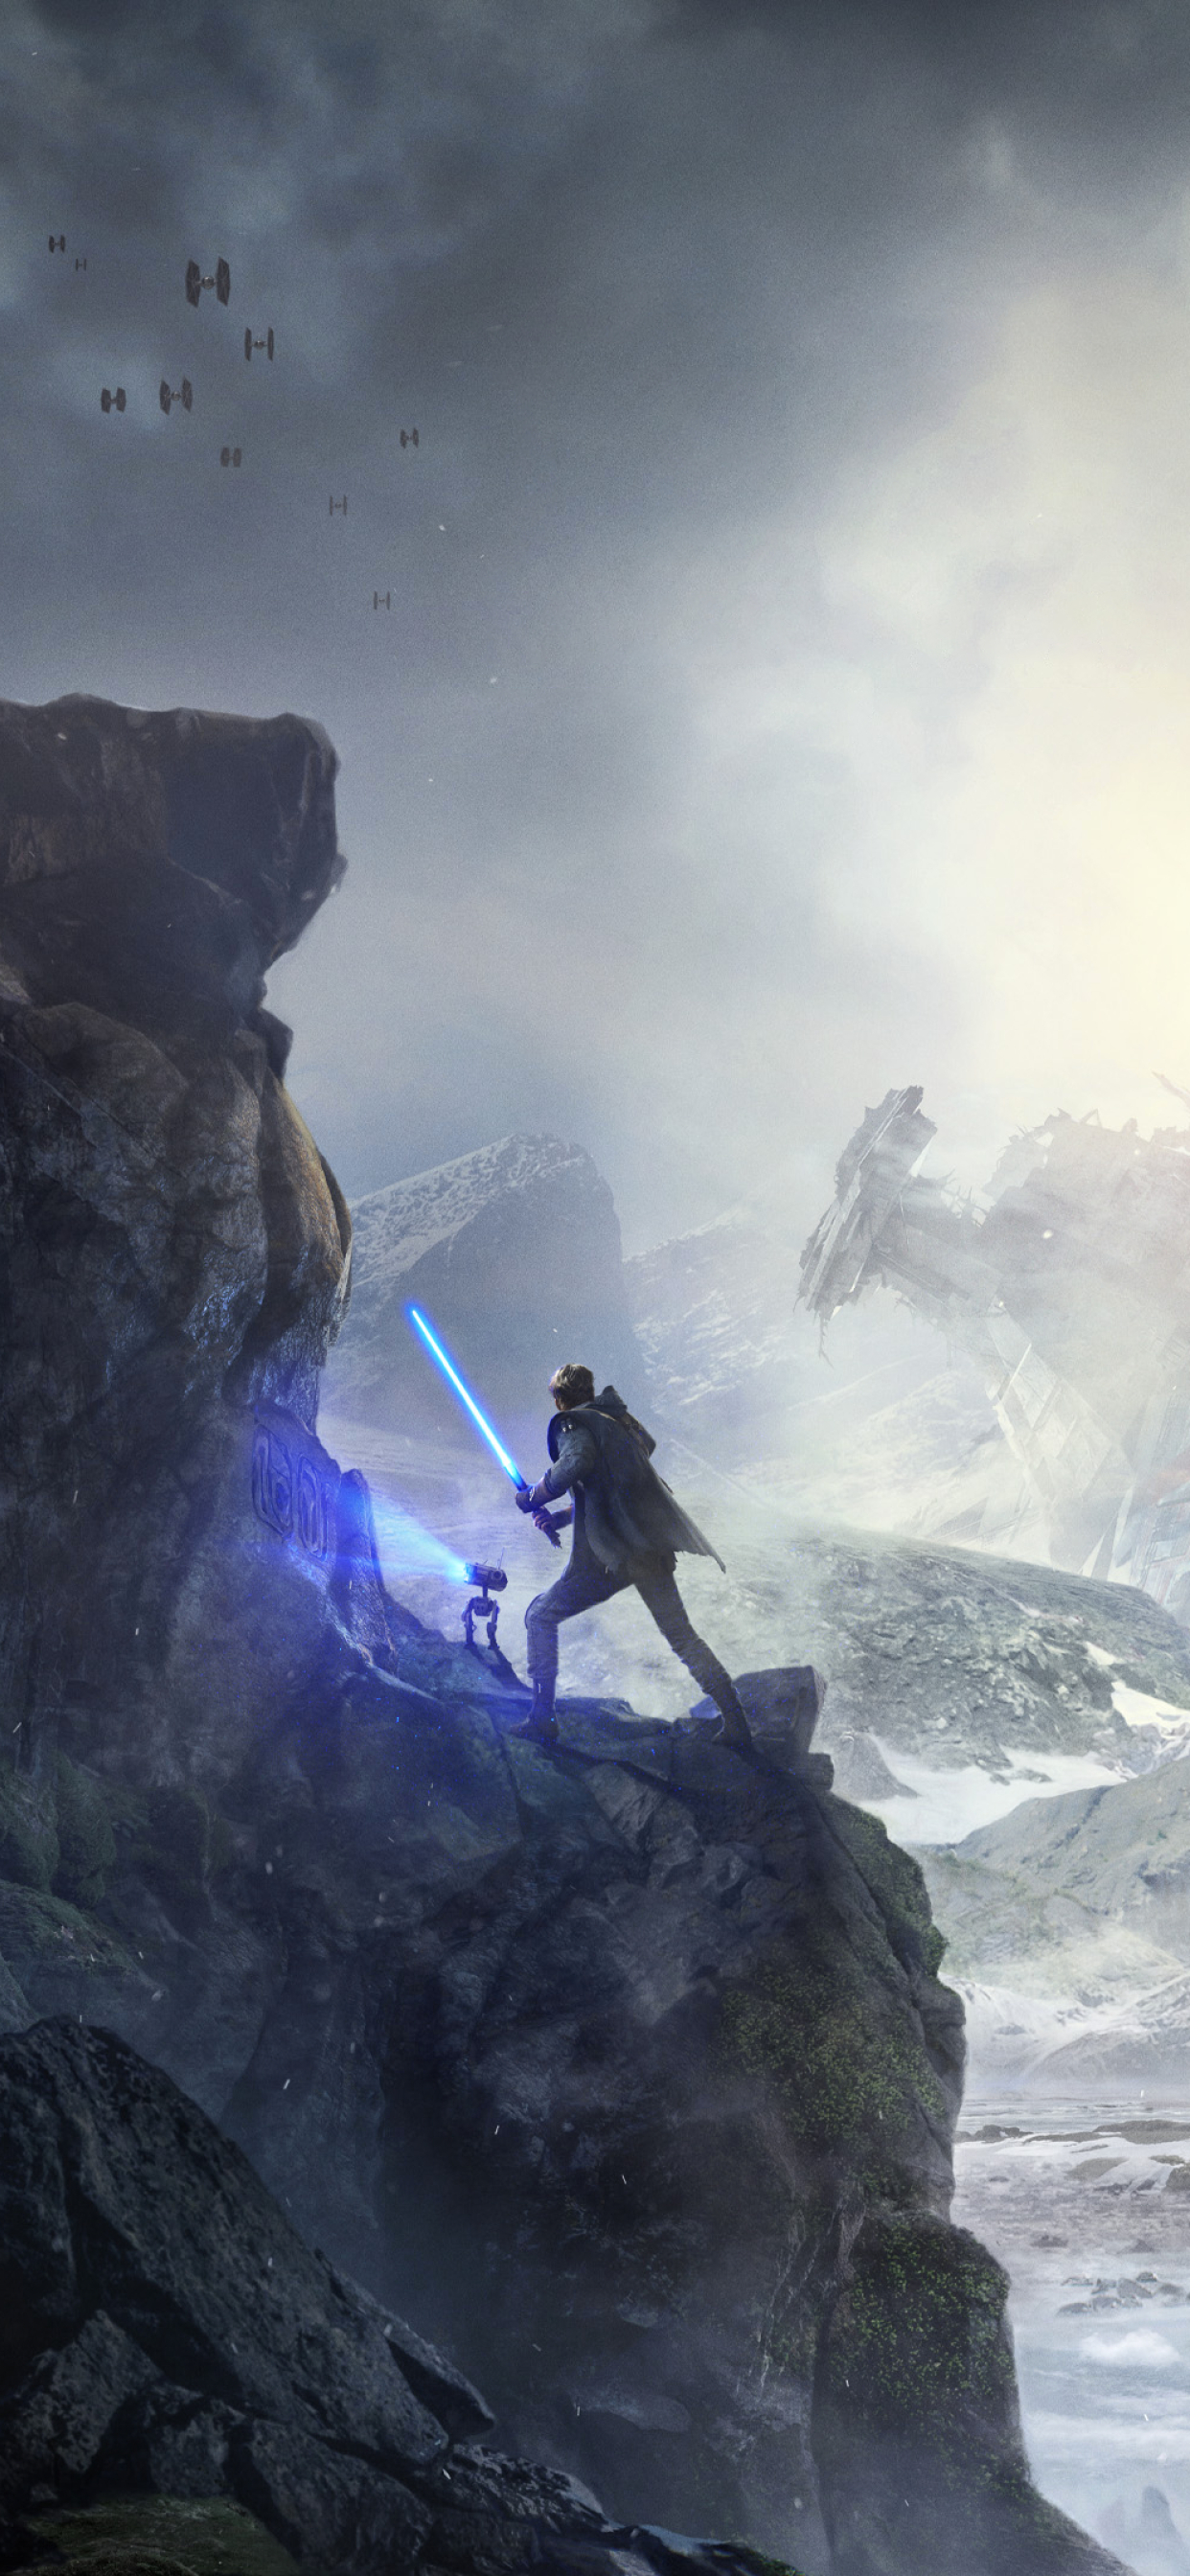 1242x26 Star Wars Jedi Fallen Order Iphone Xs Max Wallpaper Hd Games 4k Wallpapers Images Photos And Background